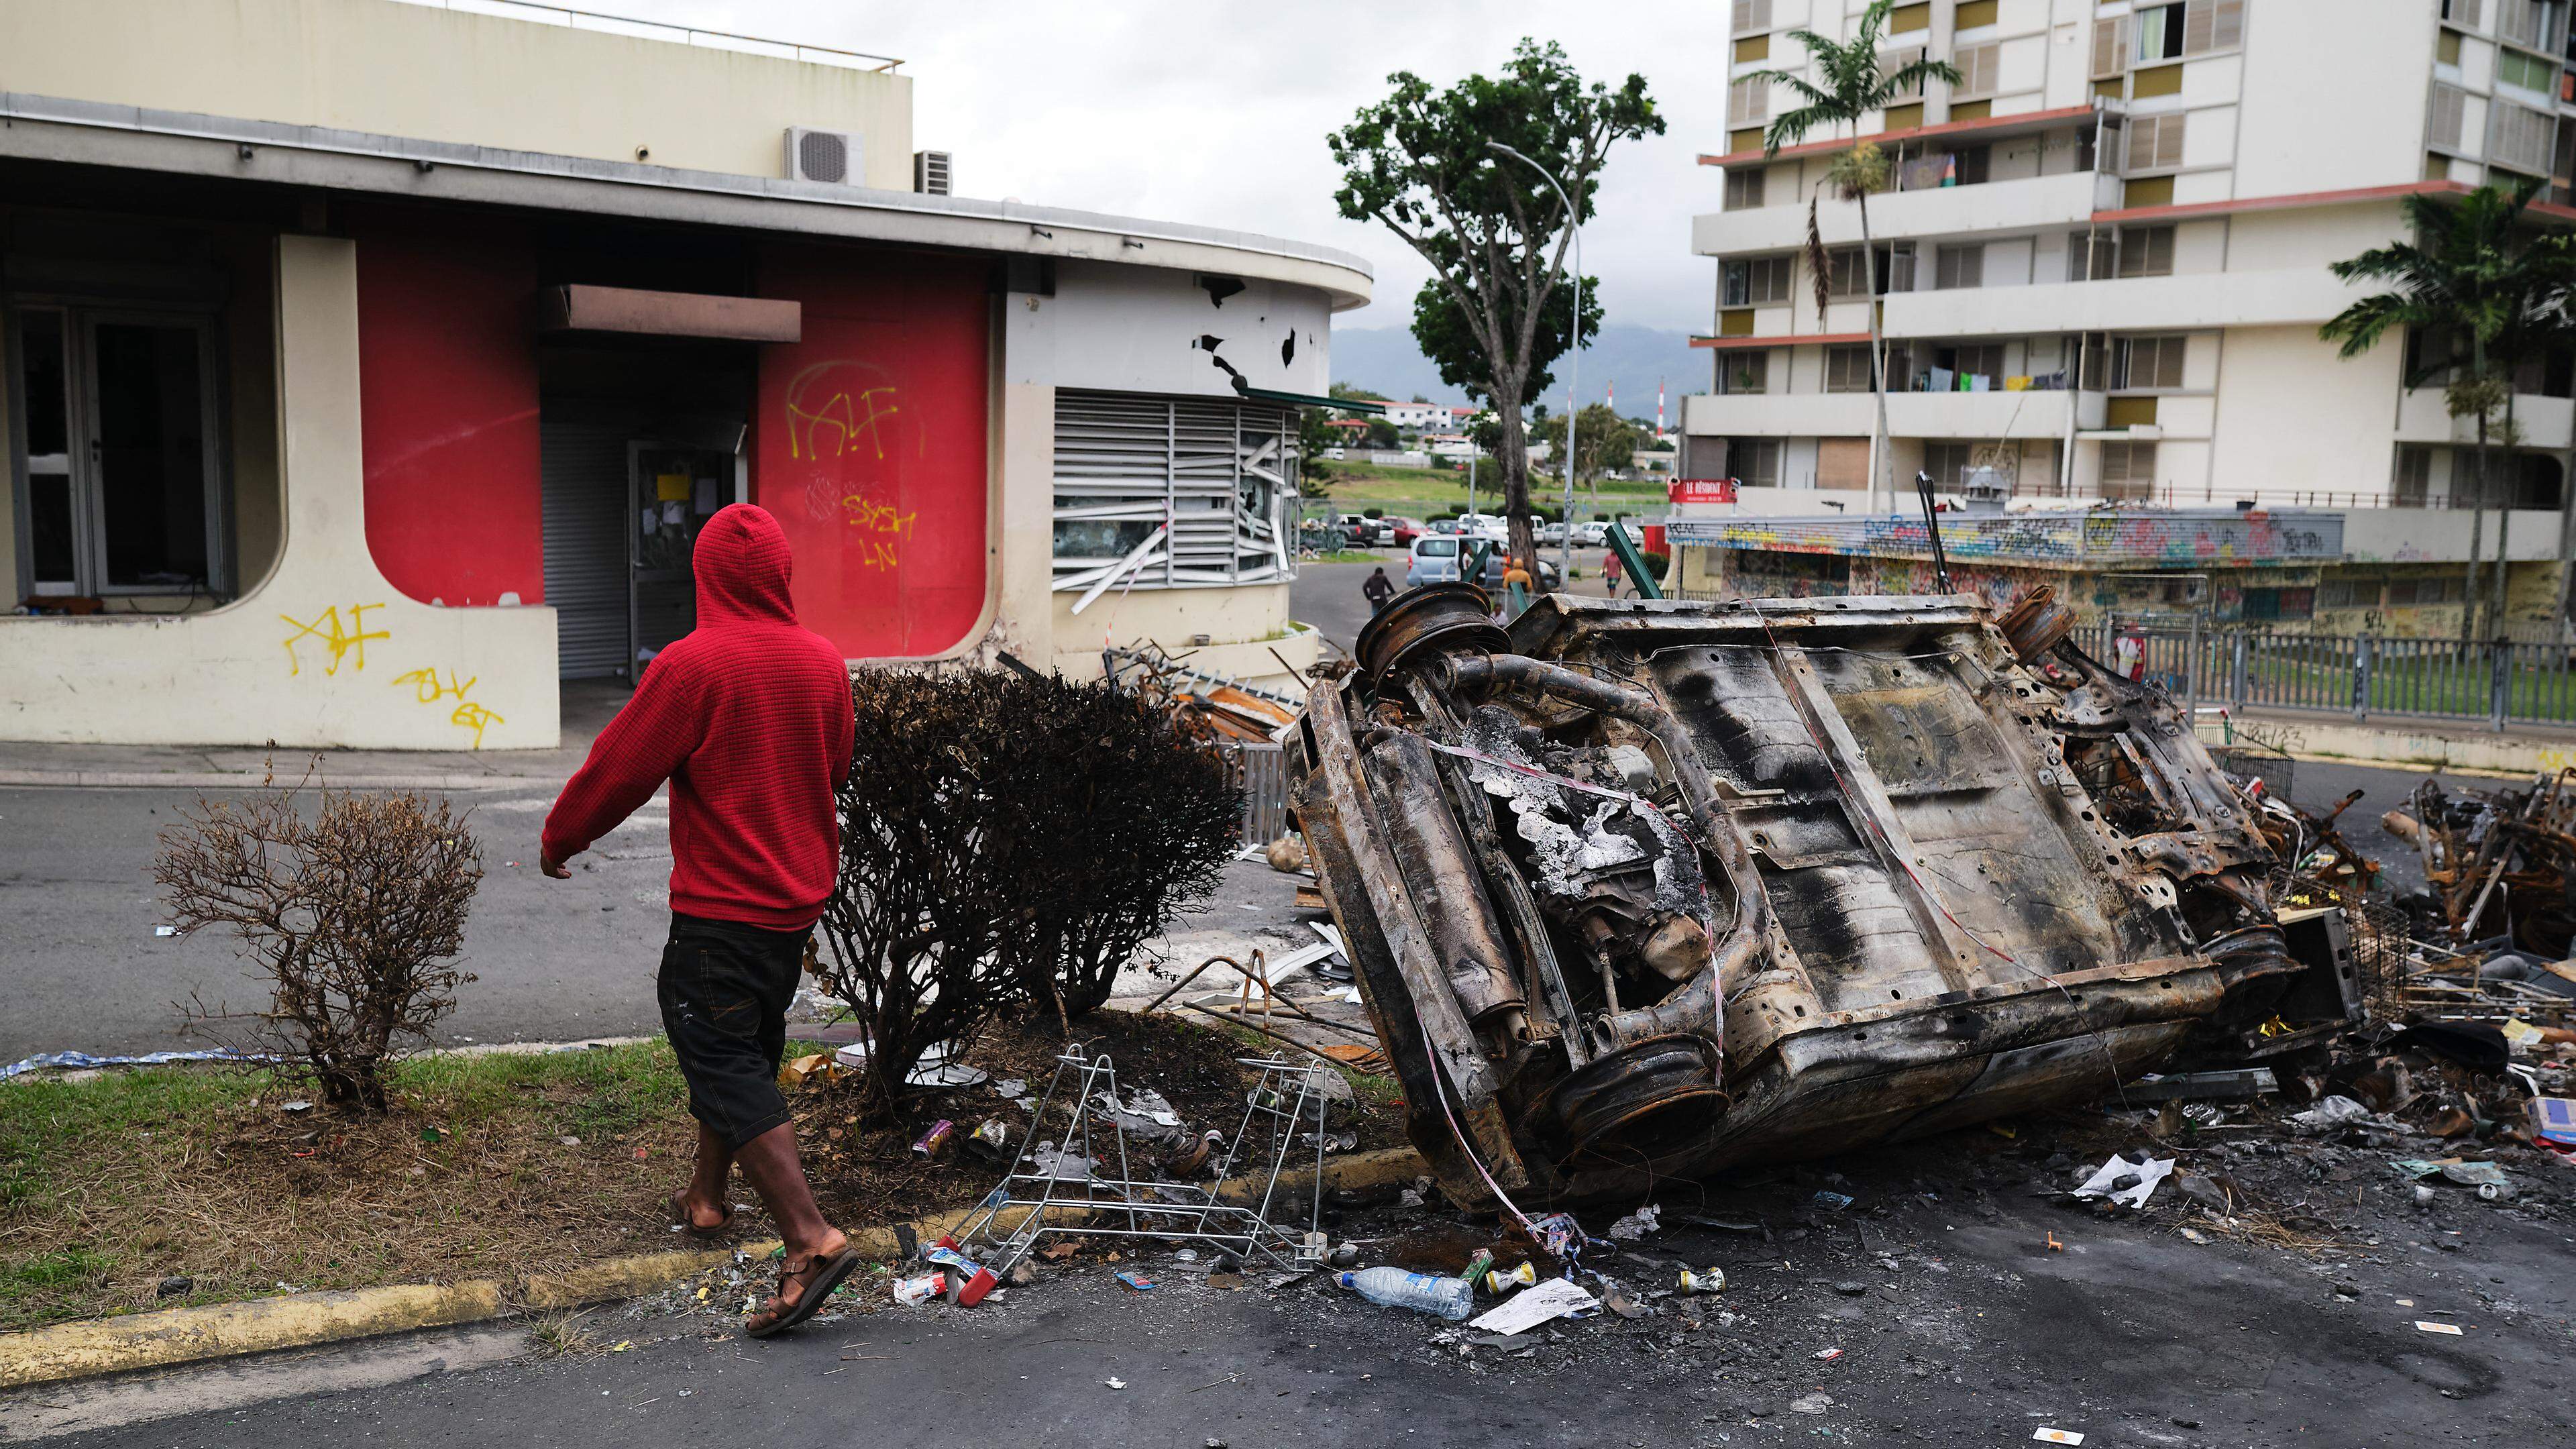 A man walks past a burnt vehicle at an independantist roadblock at Magenta Tour district in Noumea, France's Pacific territory of New Caledonia, on May 22, 2024. The Pacific territory of 270,000 people has been in turmoil since May 13, when violence erupted over French plans to impose new voting rules that would give tens of thousands of non-indigenous residents voting rights. The unrest has left six people dead, including two police, and hundreds injured. (Photo by Theo Rouby / AFP)